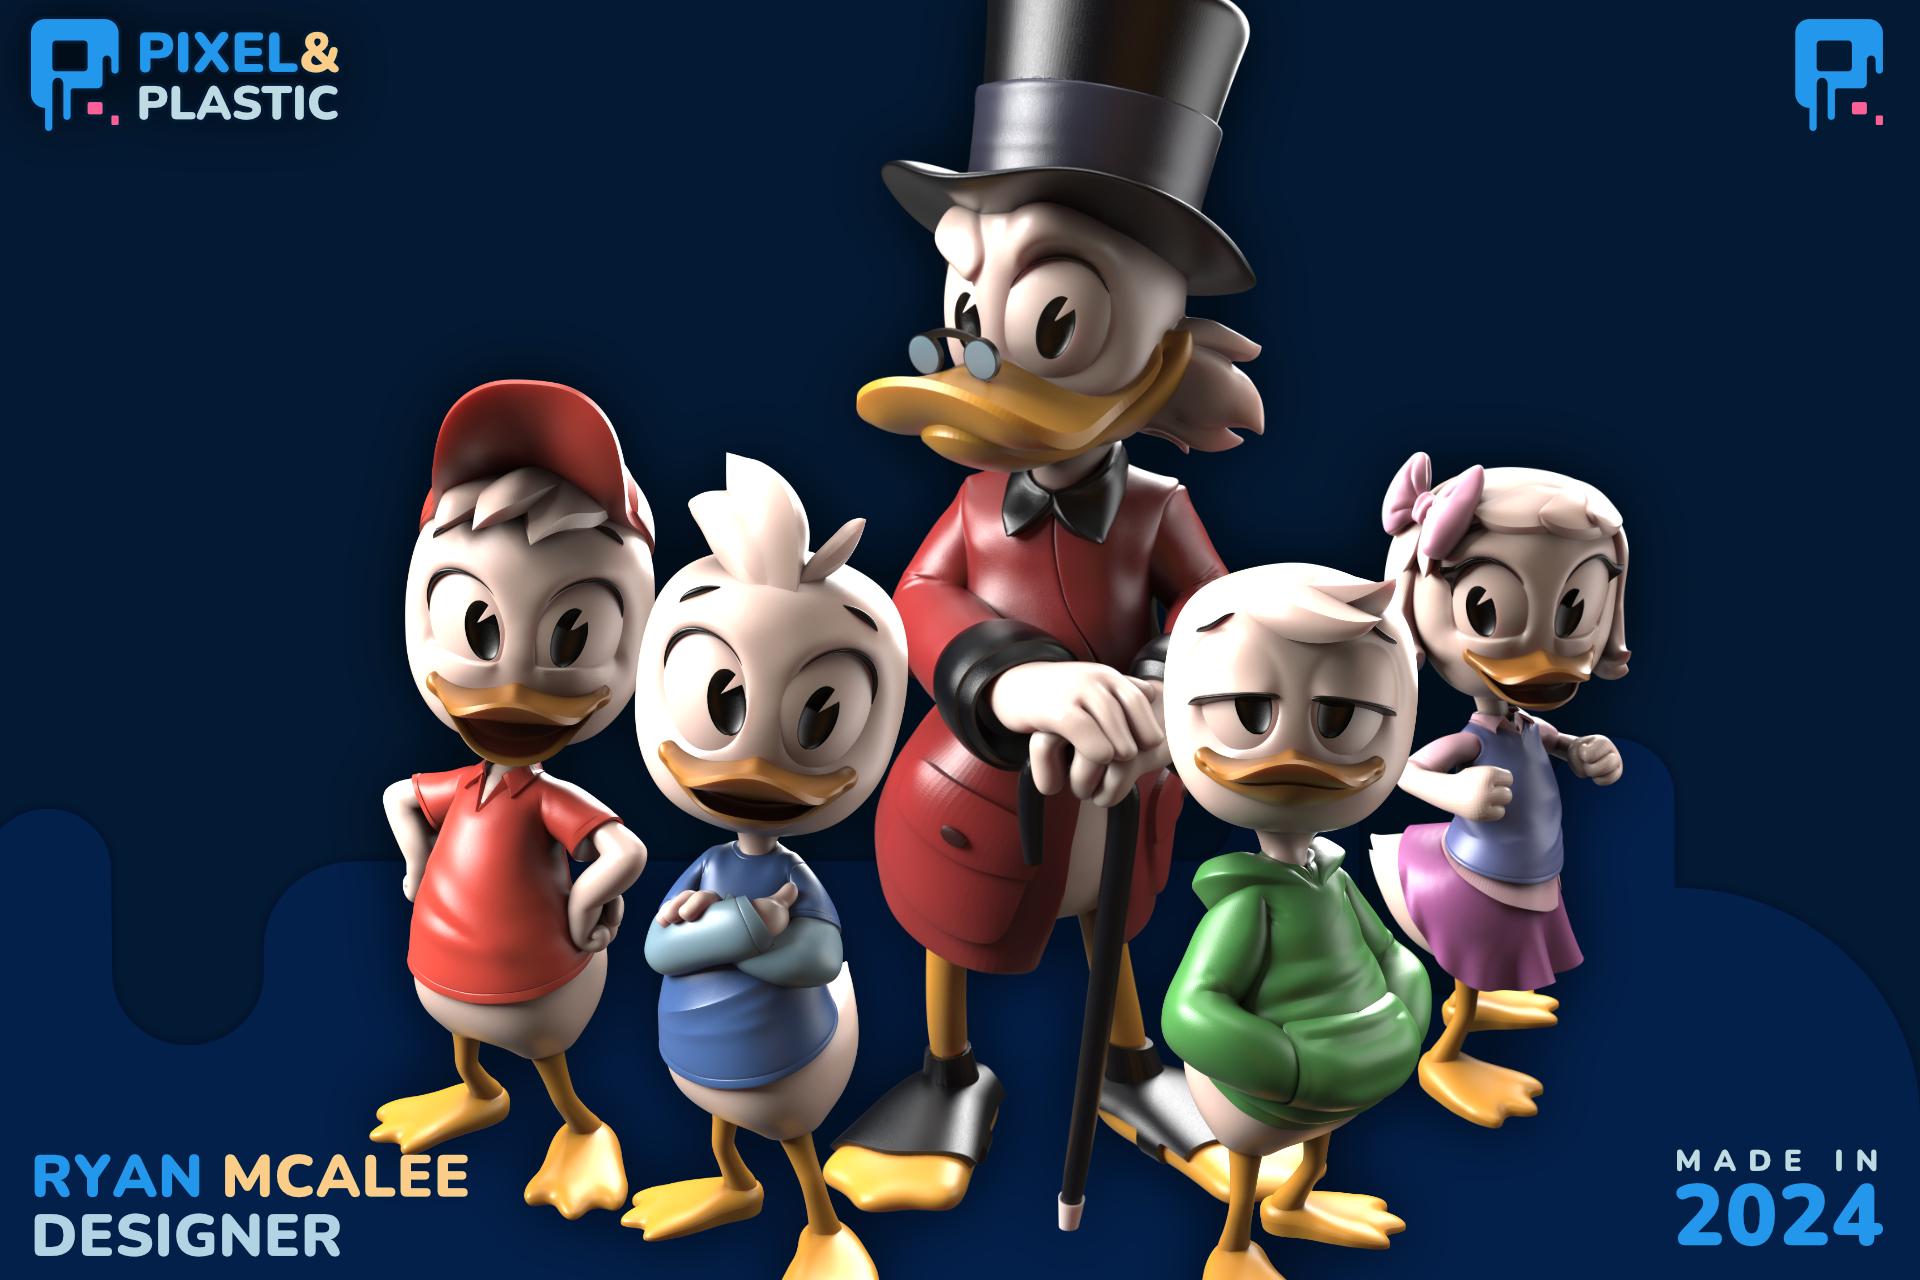 Be sure to collect the entire set for Ducktales.